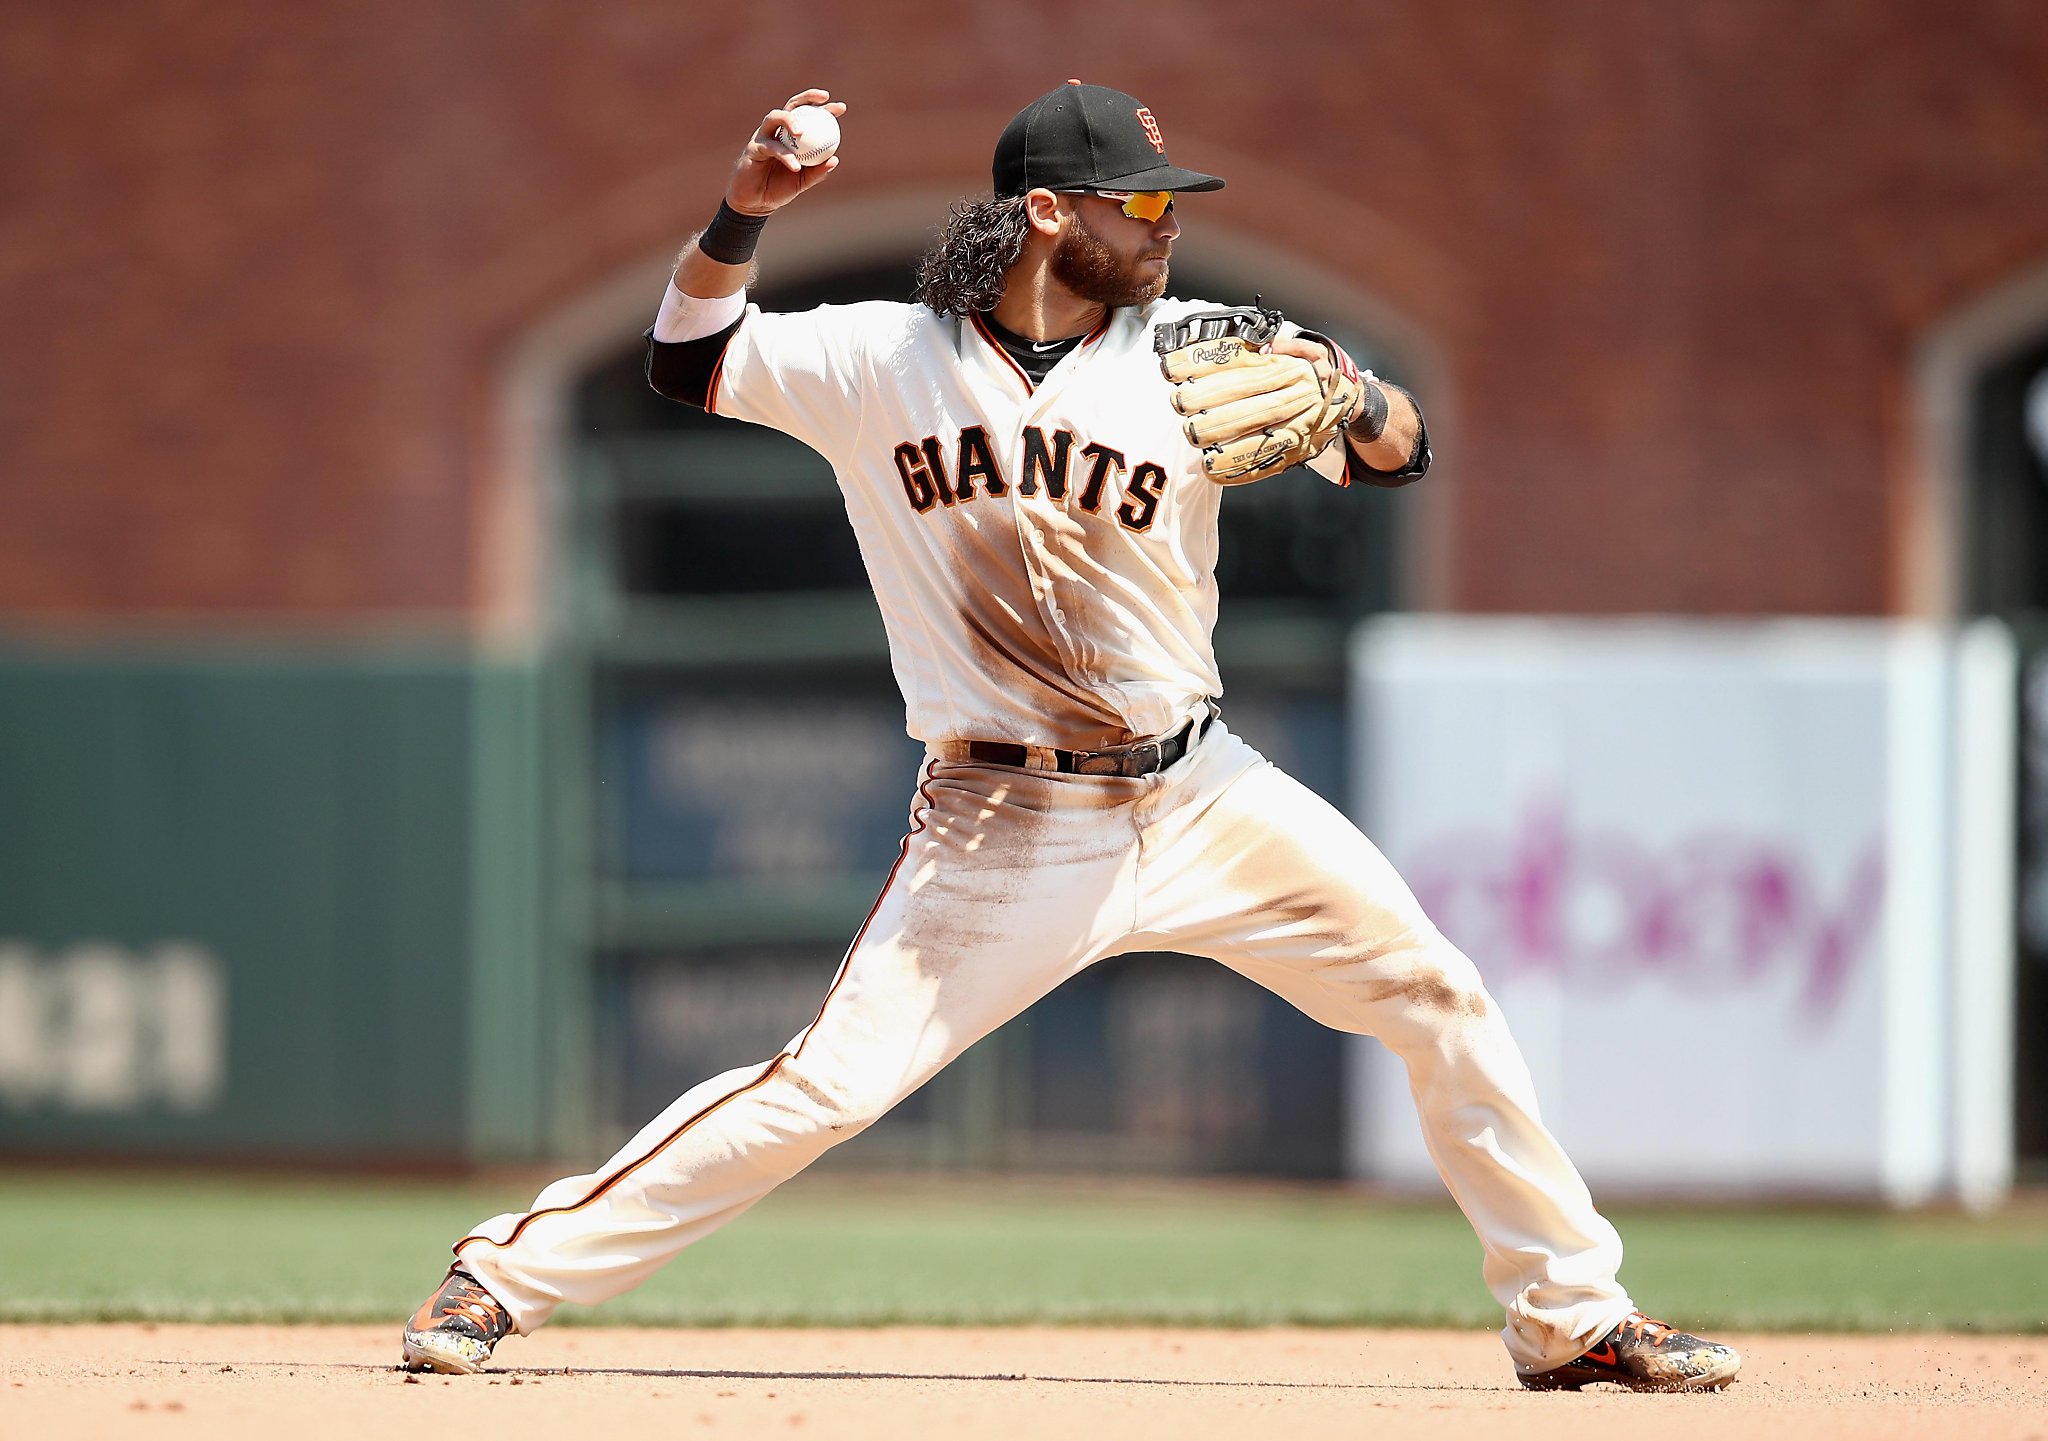 Brandon Crawford takes advantage of rare opportunity in Giants